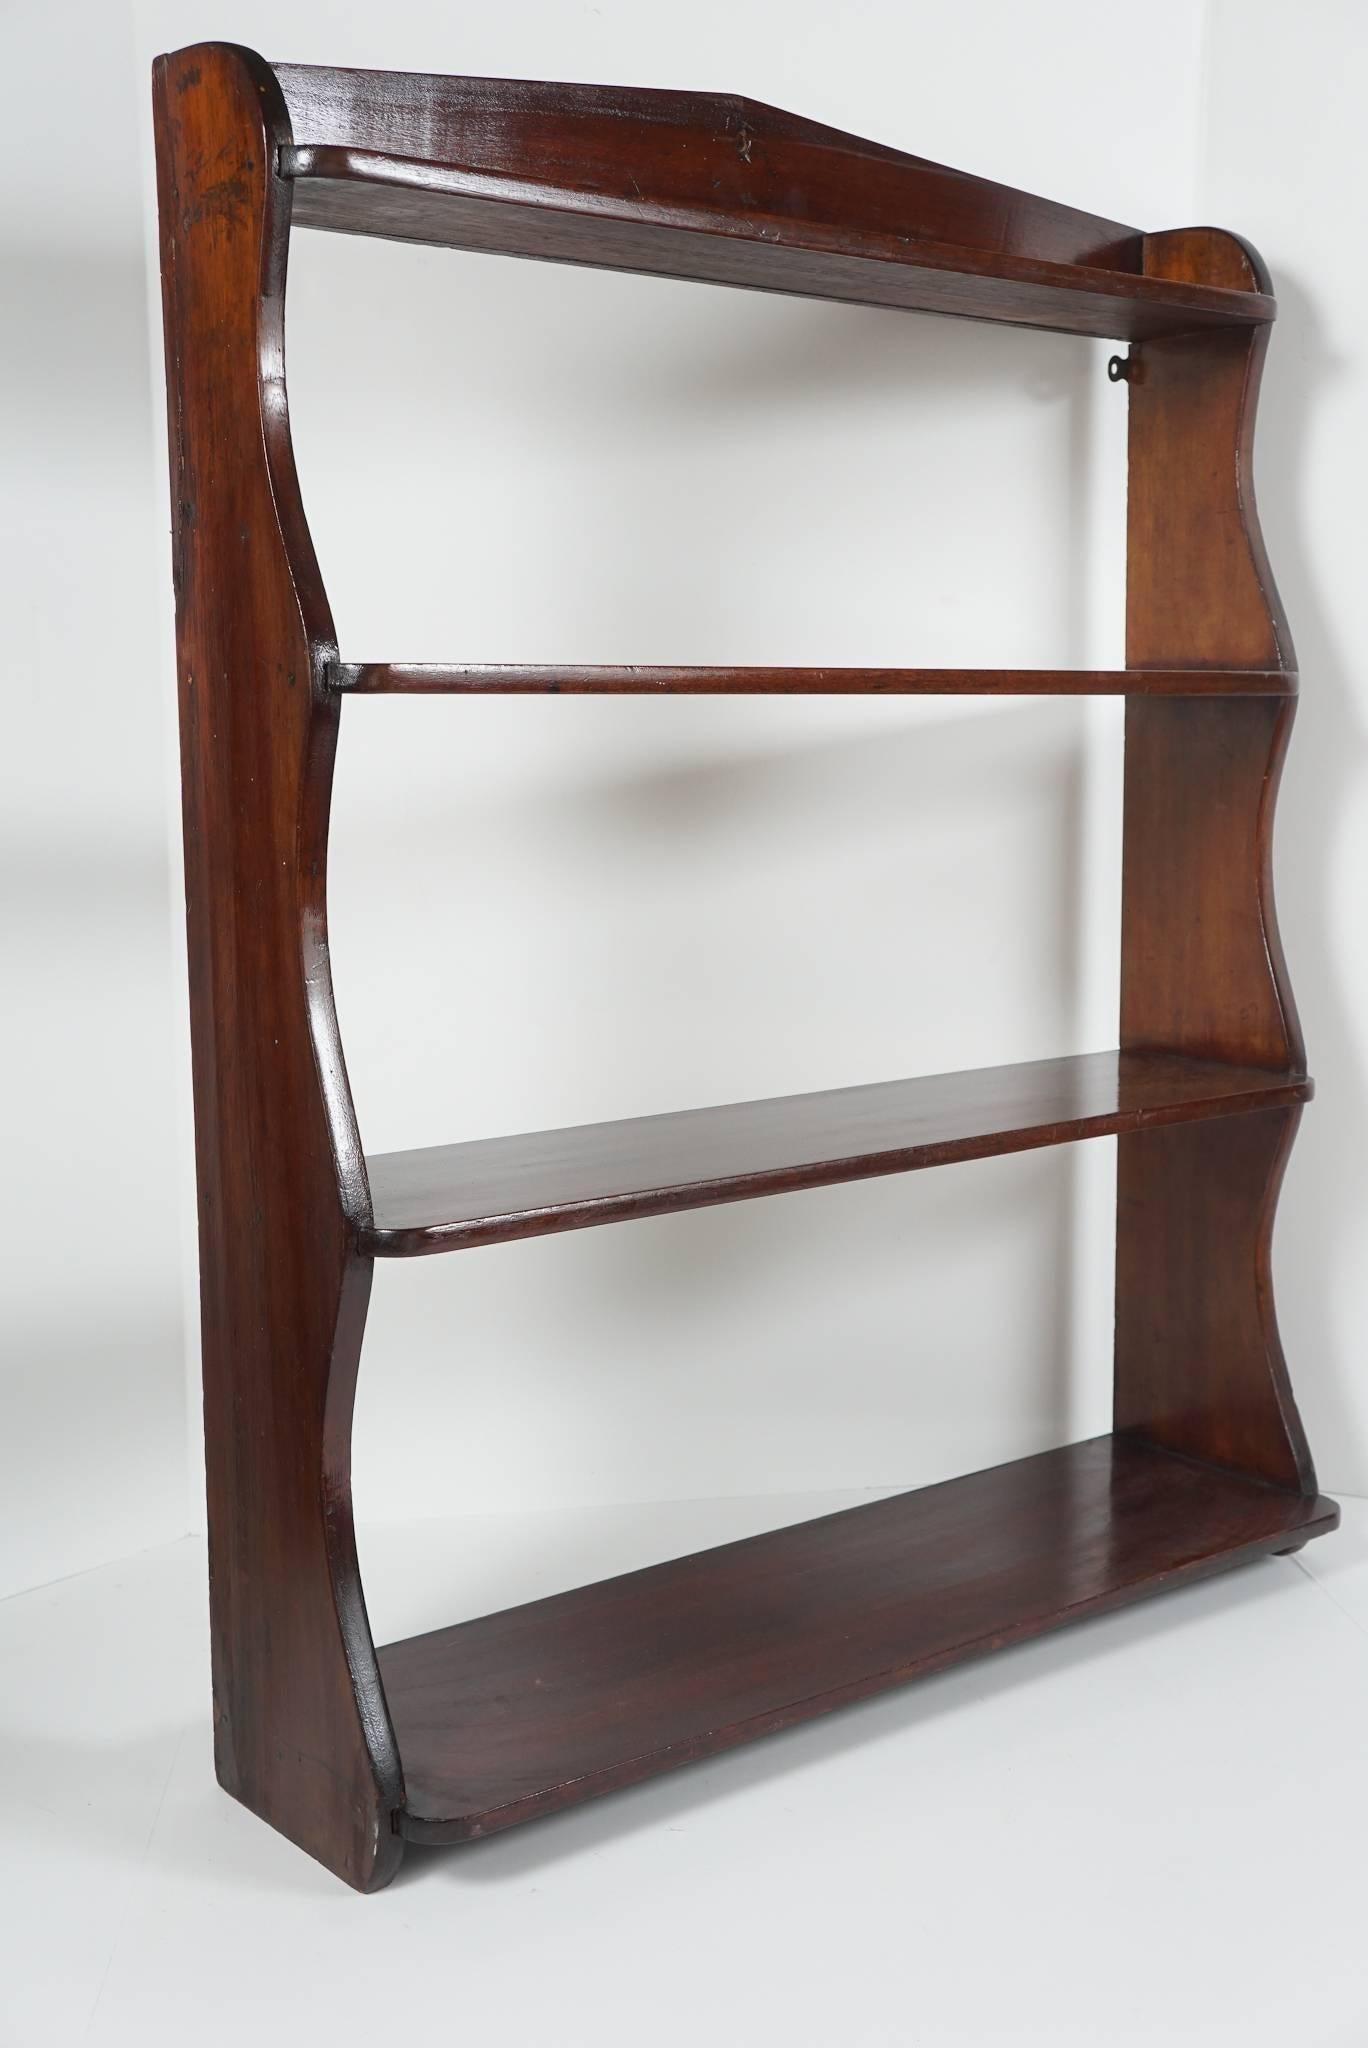 Collection of Regency Mahogany Items from the Estate of Paul & Bunny Mellon 1